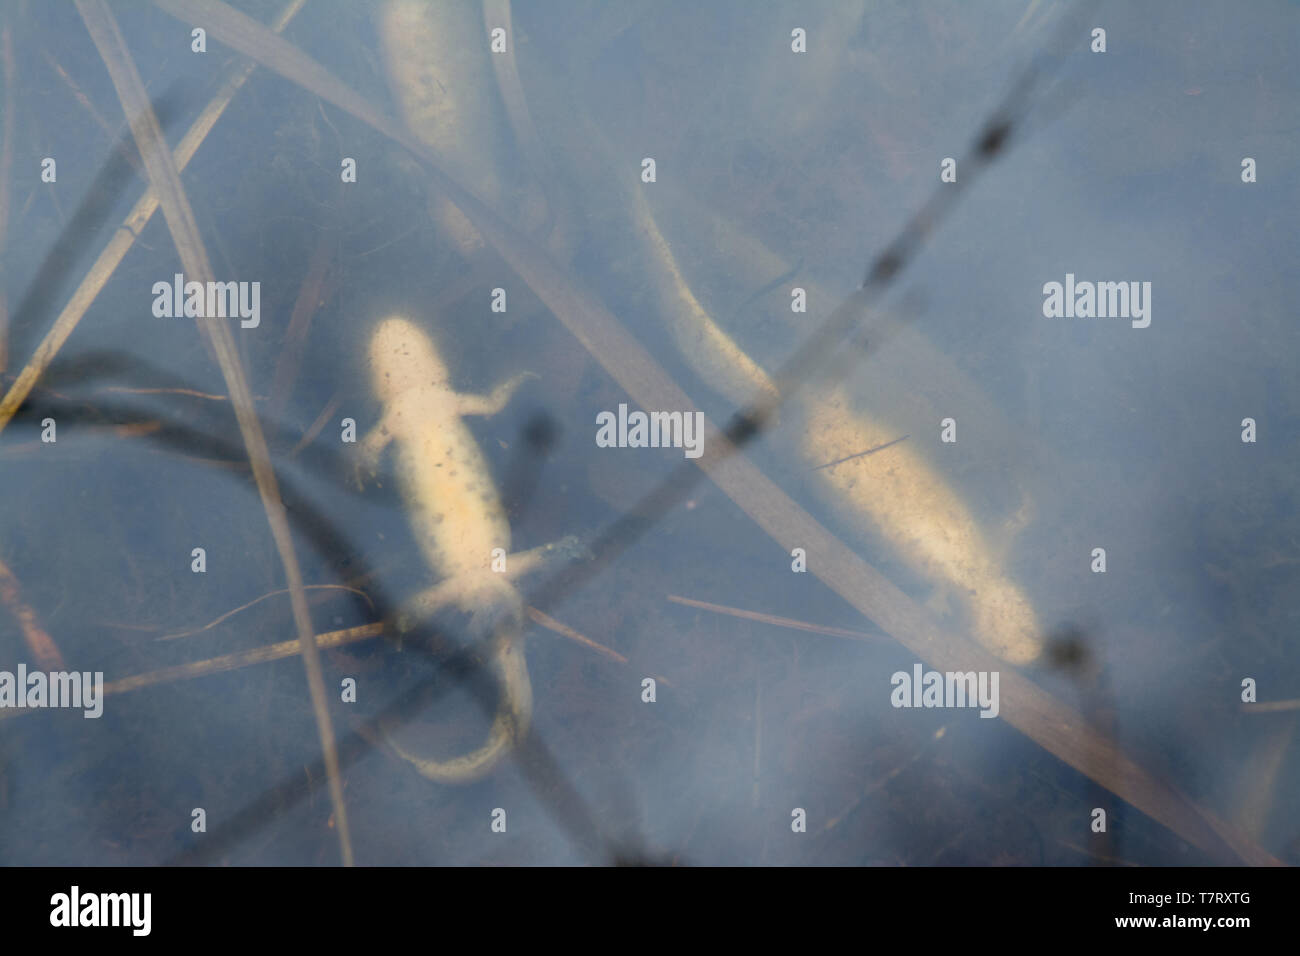 Dead newts in a breeding pond after a late cold spell with freezing temperatures during March 2018 (called the beast from the east). Stock Photo